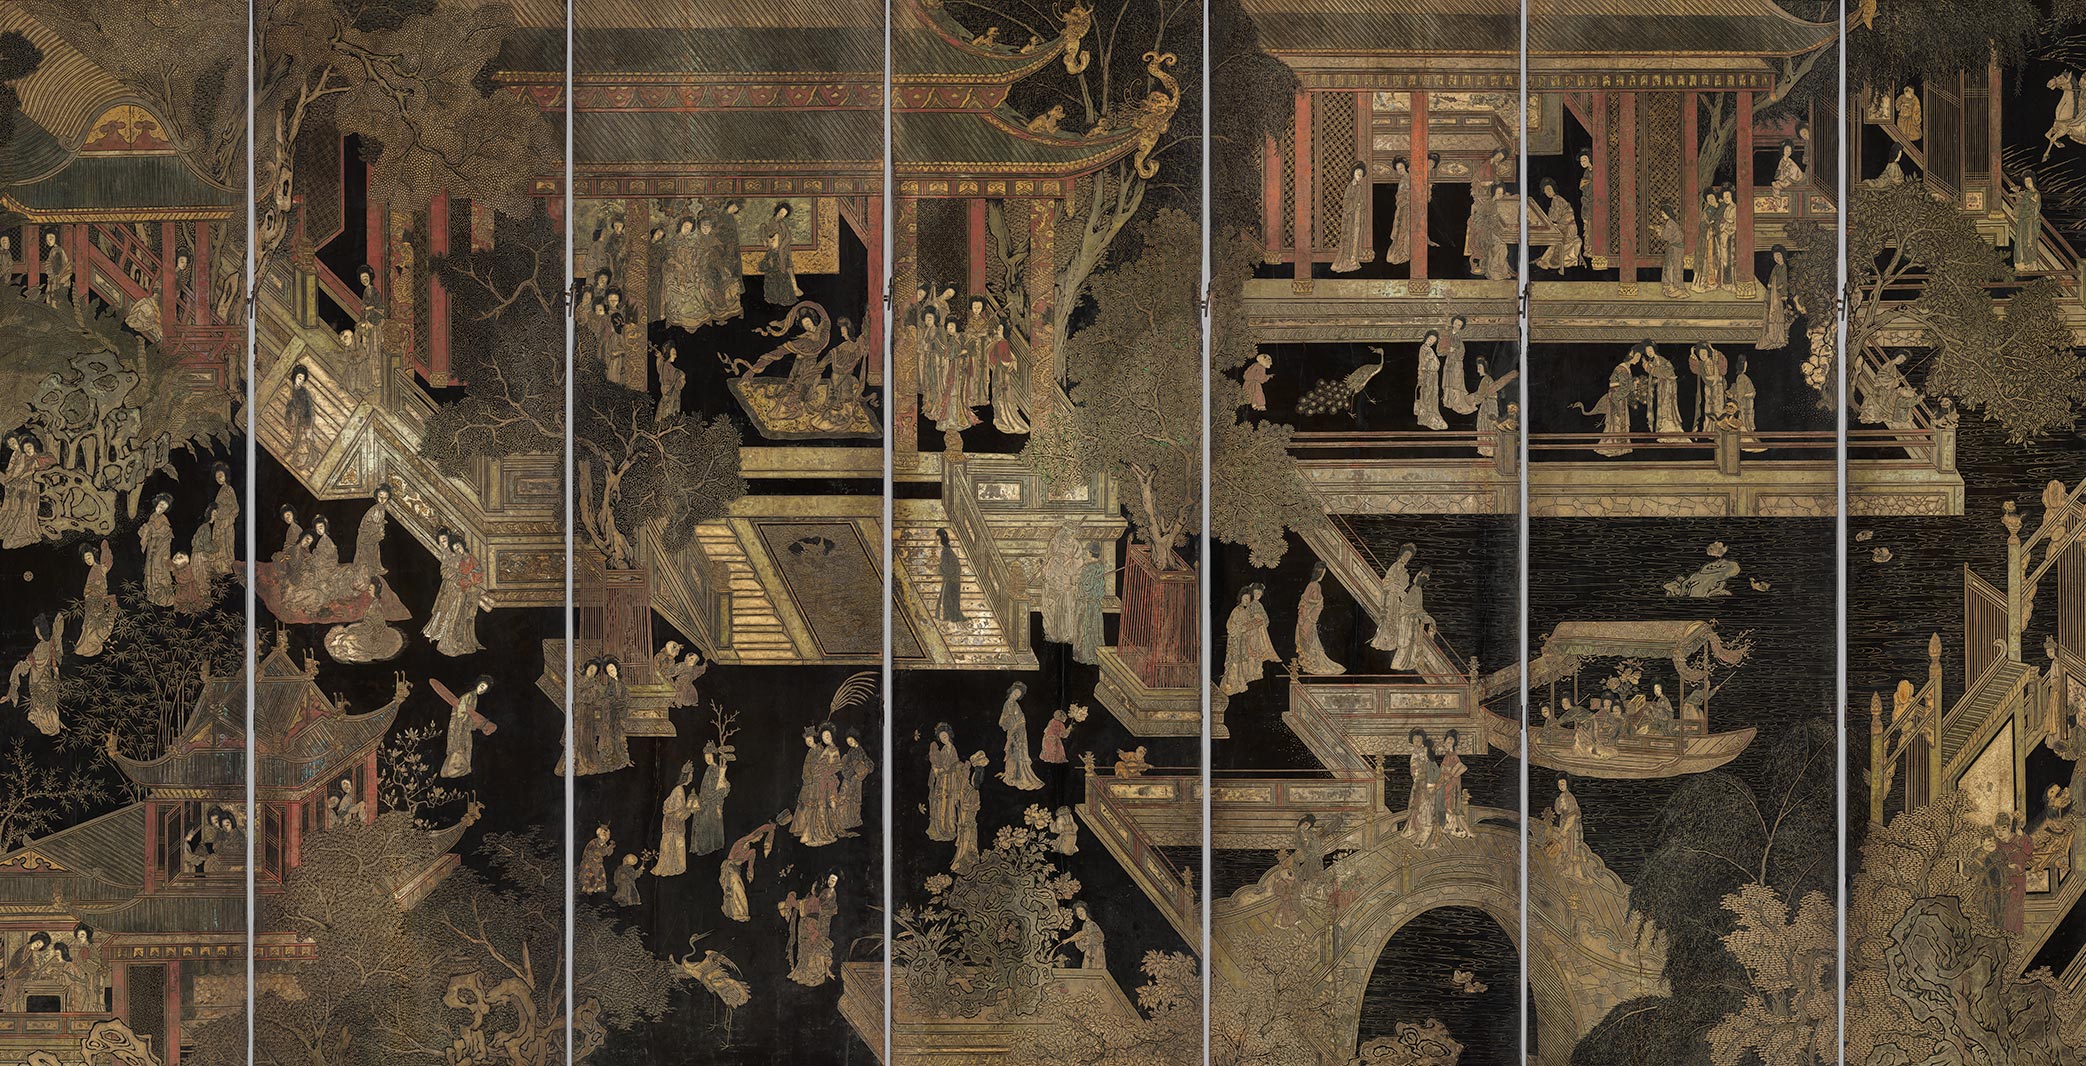 A set of narrow, vertical panels arranged side by side. An expansive, detailed scene of palace buildings and grounds, populated by many figures, is rendered in multi-tonal inlays and black lacquer.